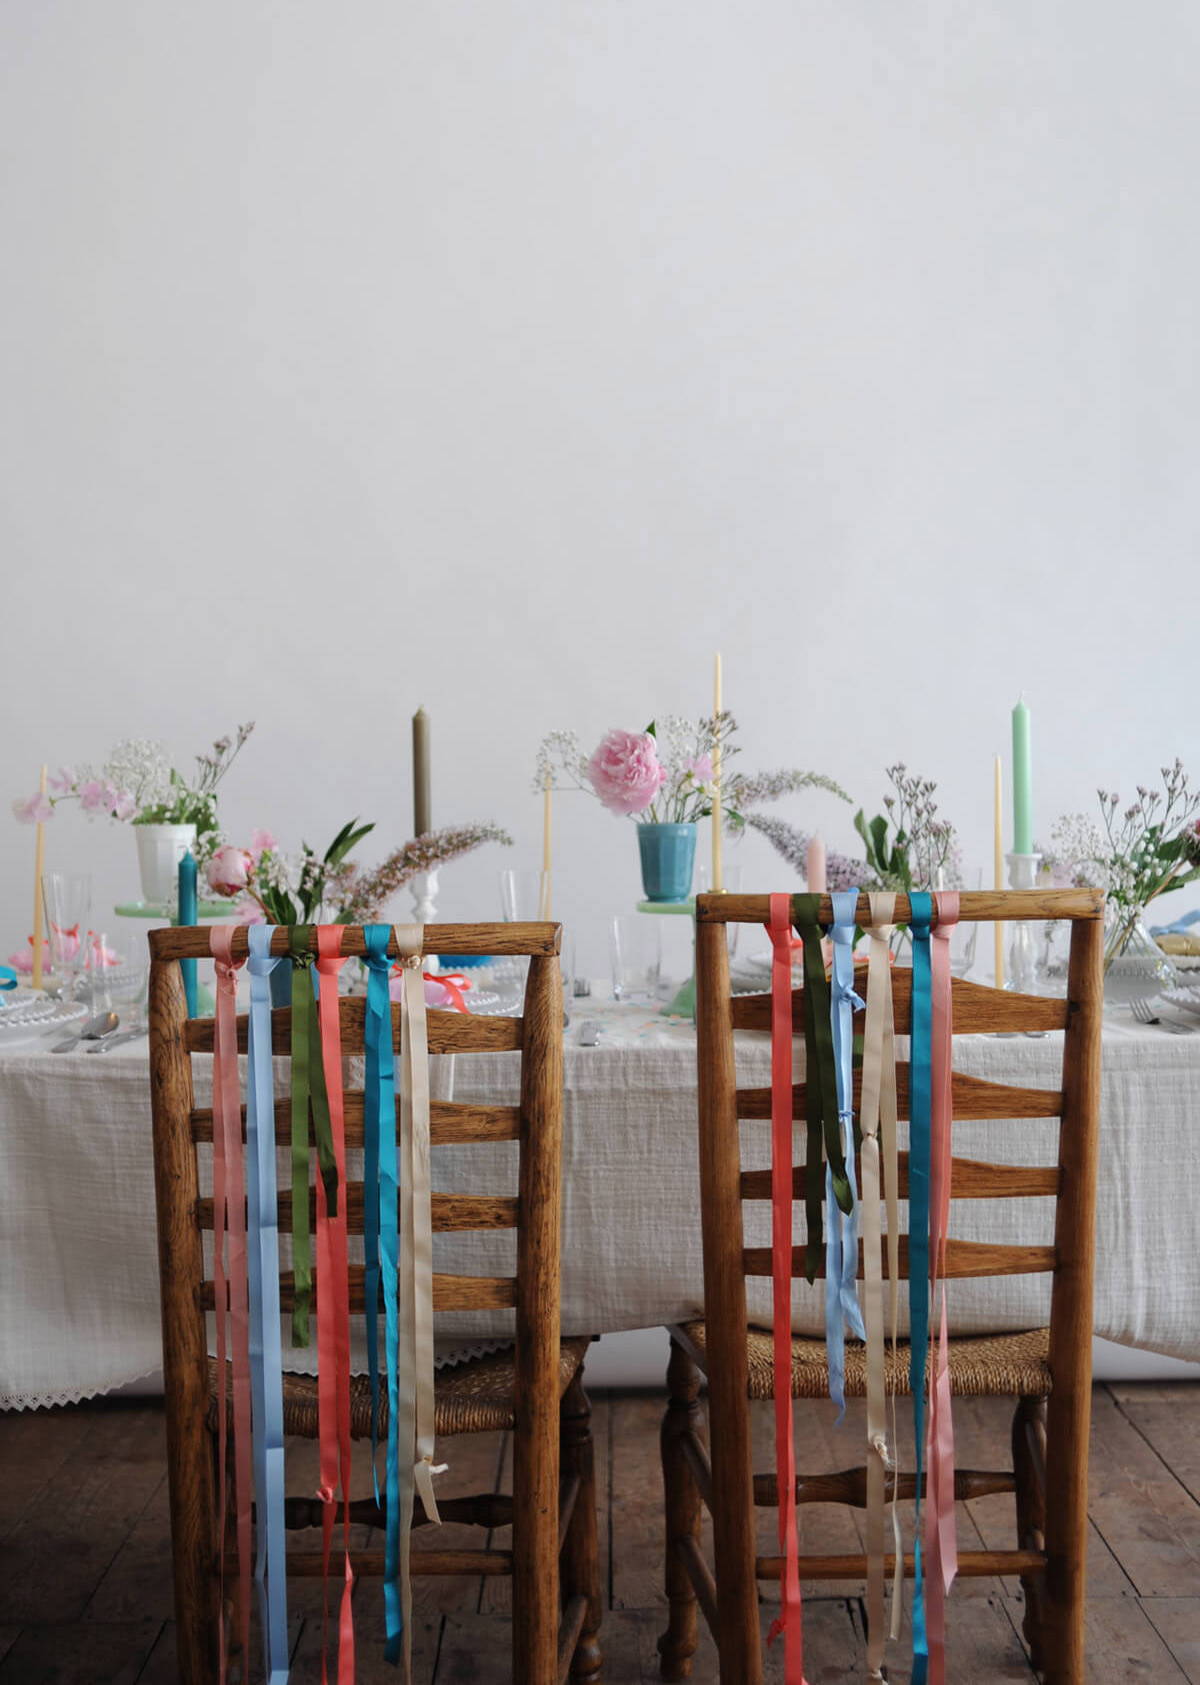 A photograph of ribbon-adorned chairs set at the wedding tablescape.